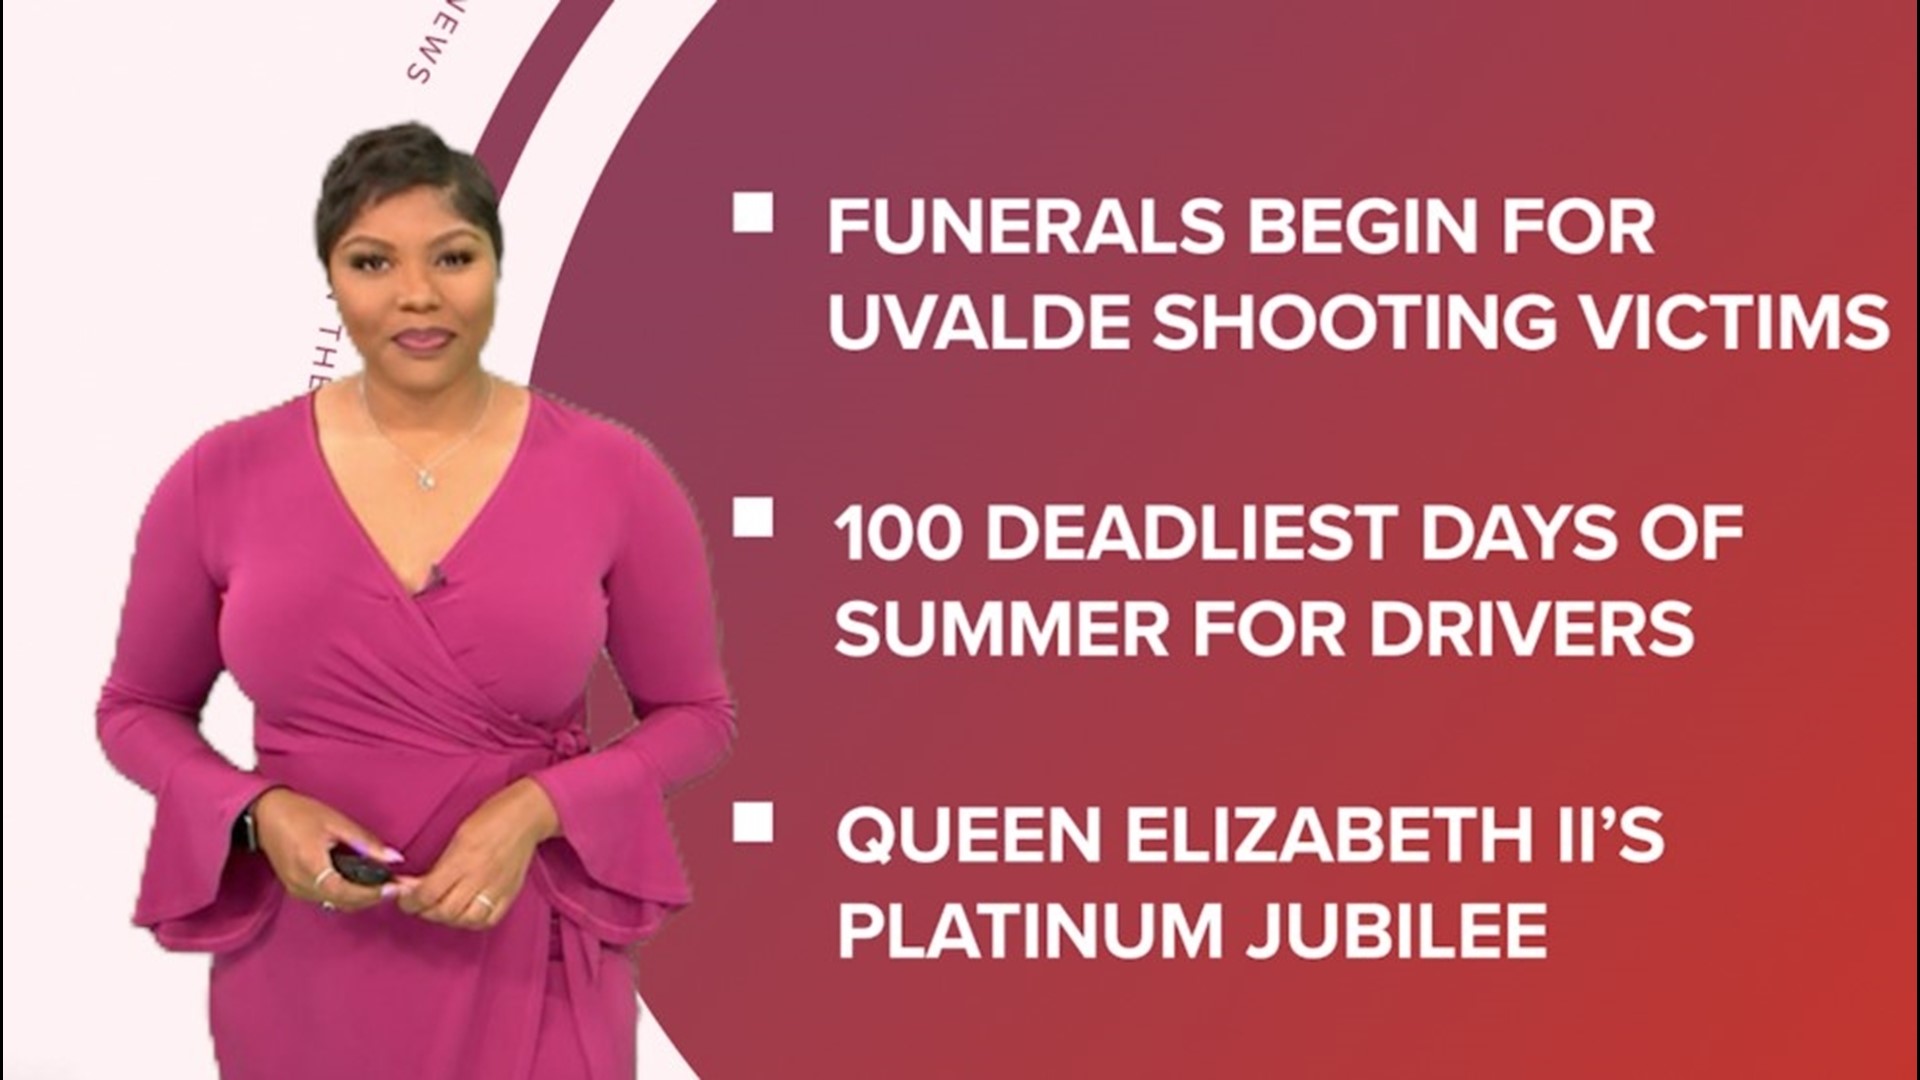 A look at what is happening across the U.S. from funerals beginning in Uvalde, TX to the start of the Atlantic hurricane season and the Queen's platinum jubilee